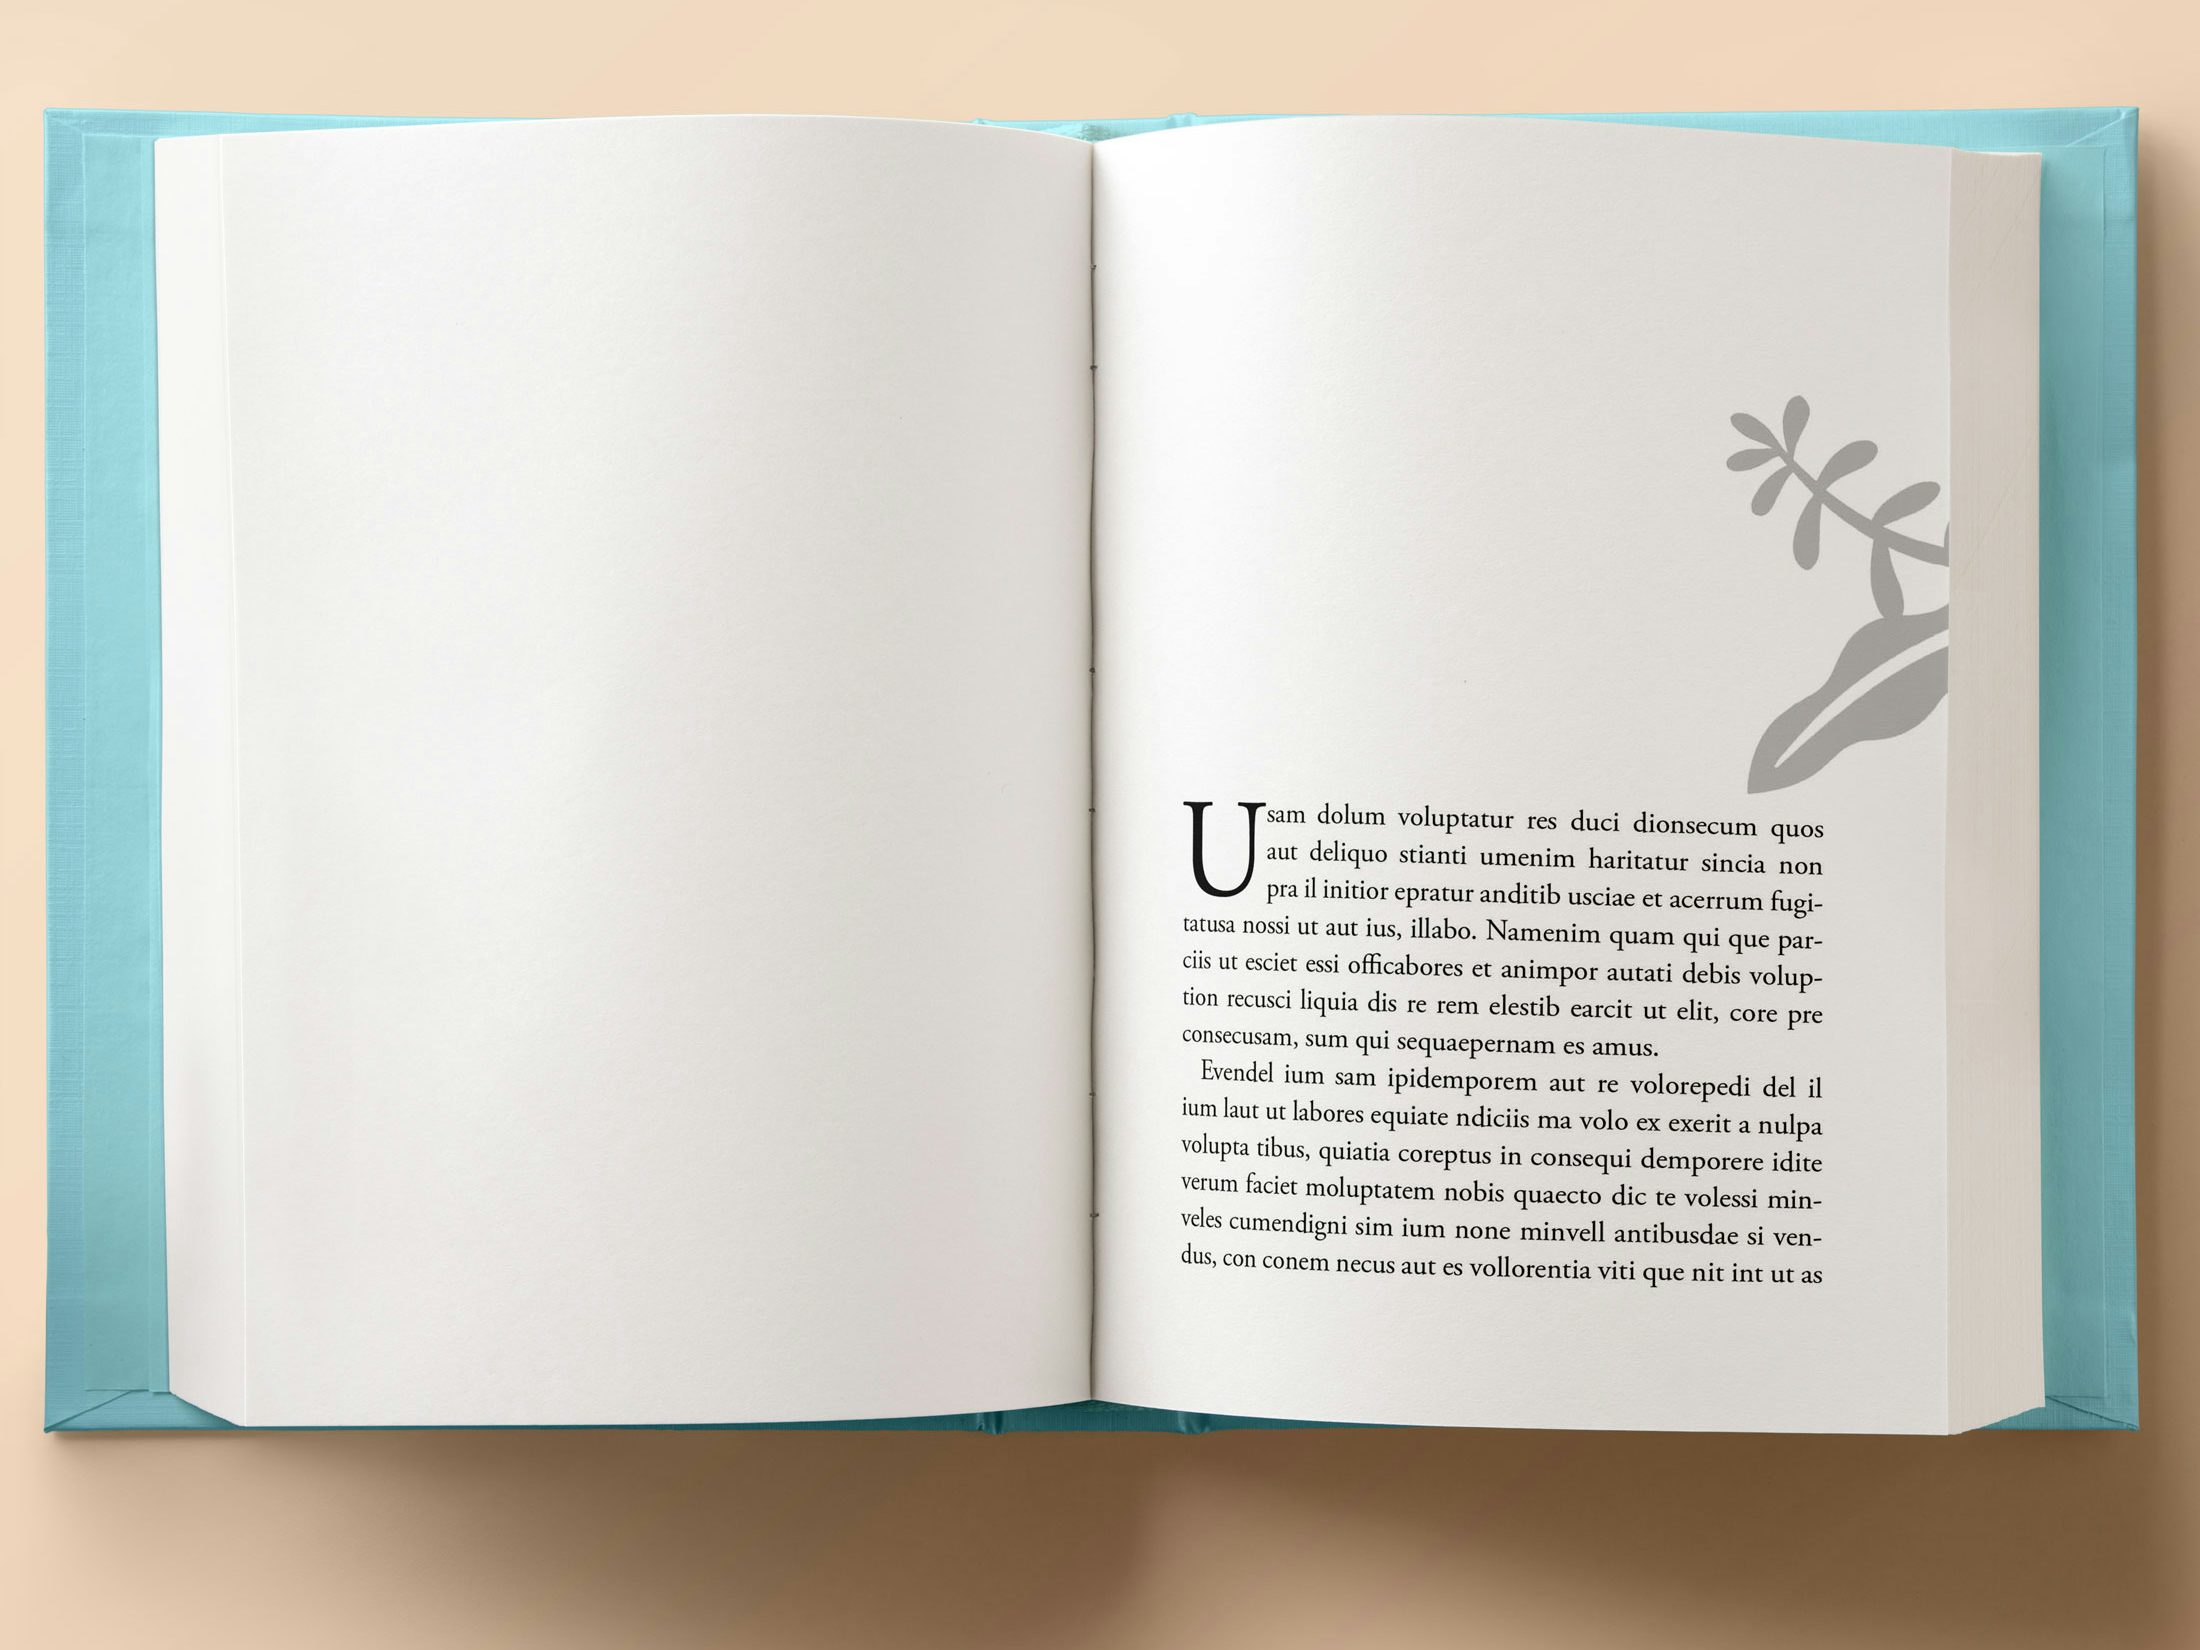 7 book layout design and typesetting tips - 99designs